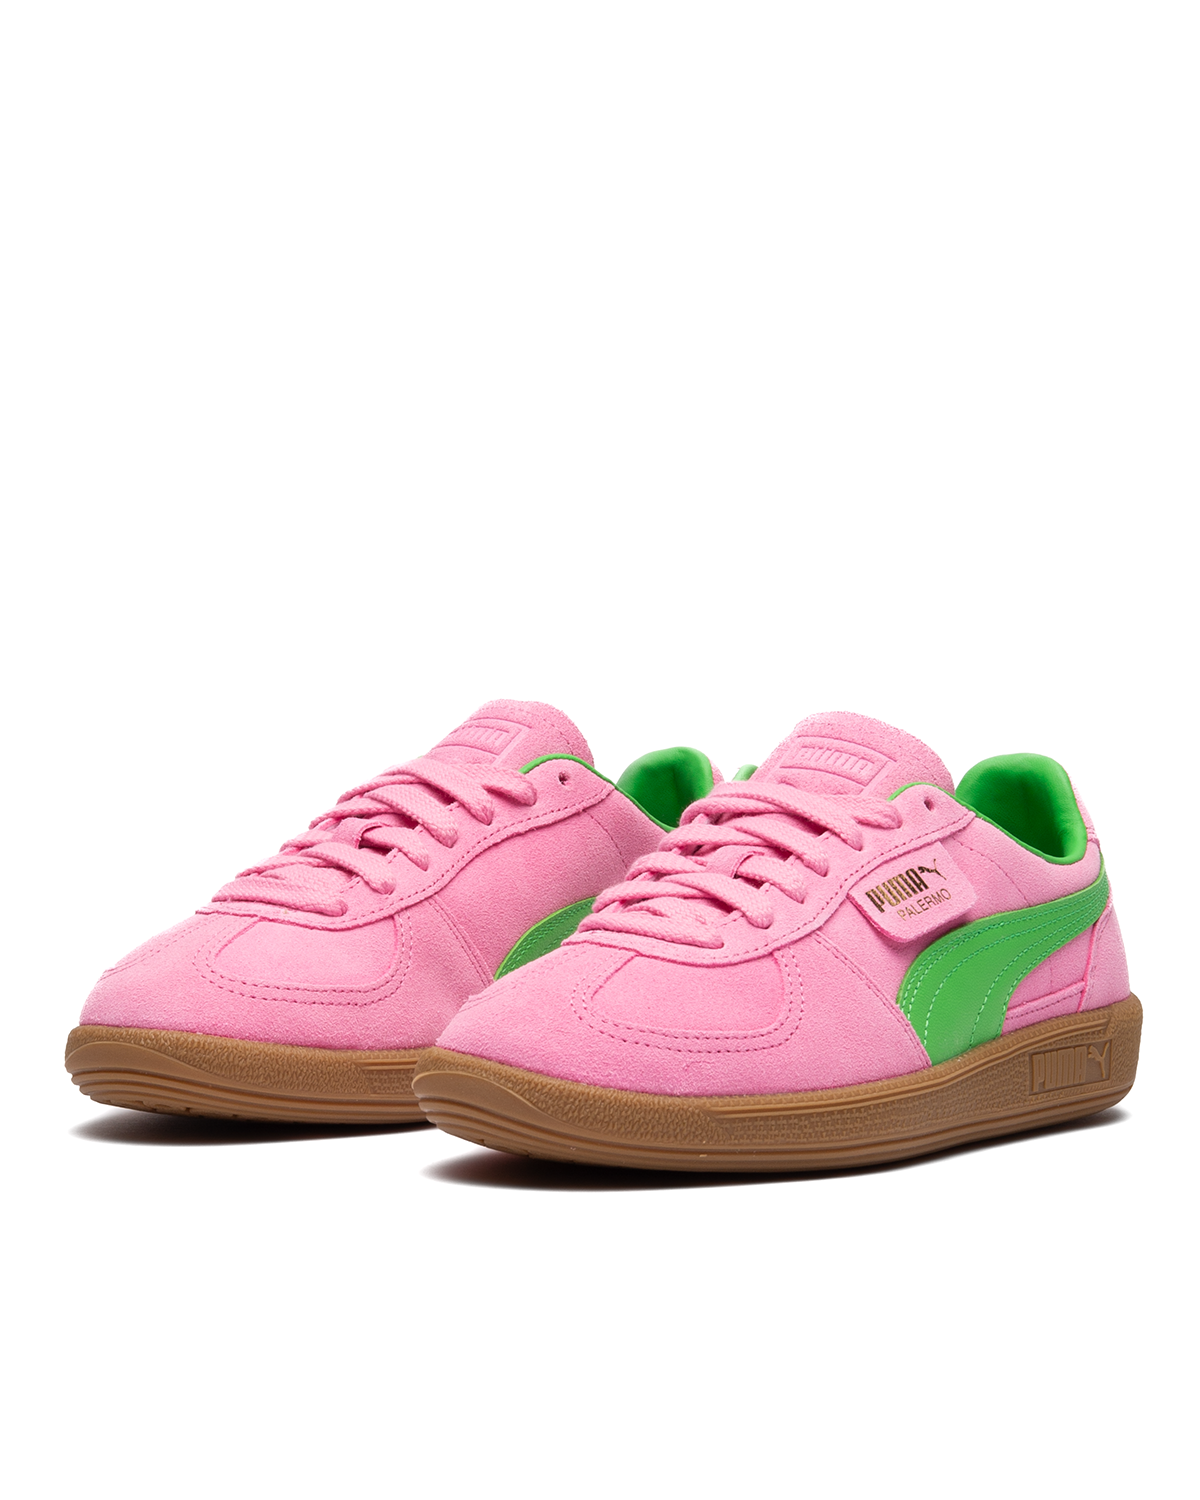 Wmns Palermo Special Pink Delight/Puma Green/Gum